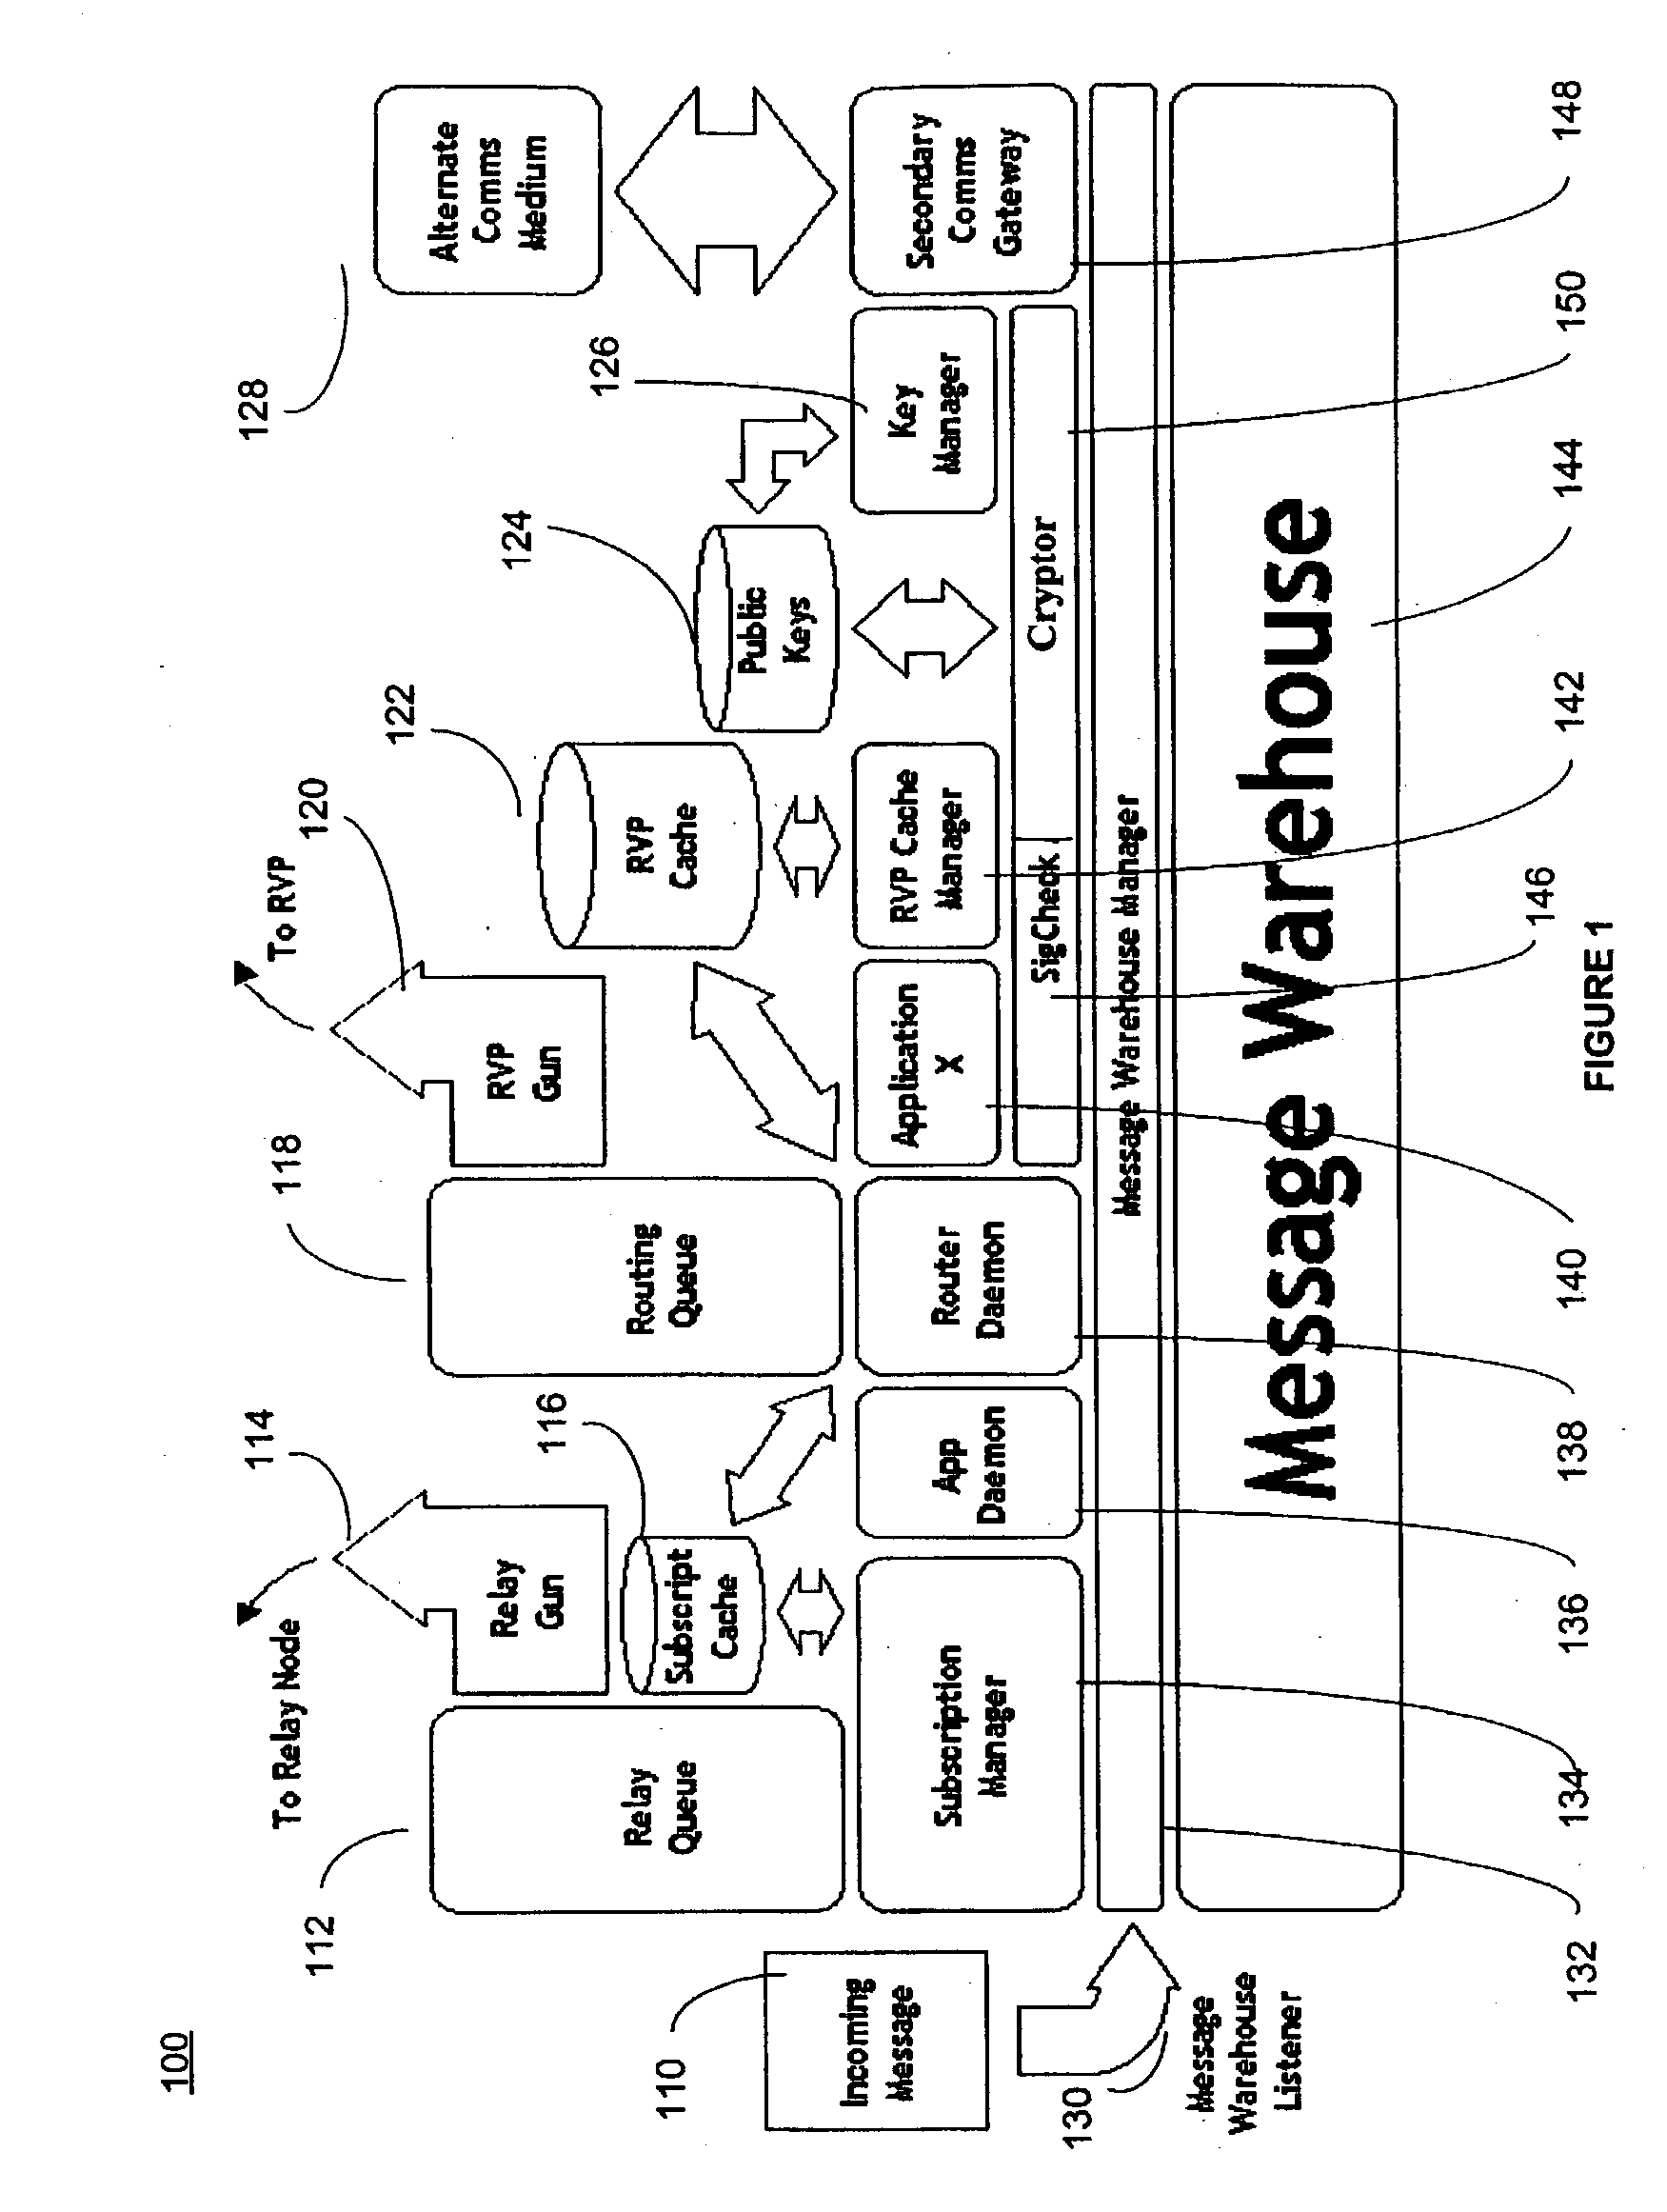 System and Method for Secure Message-Oriented Network Communications